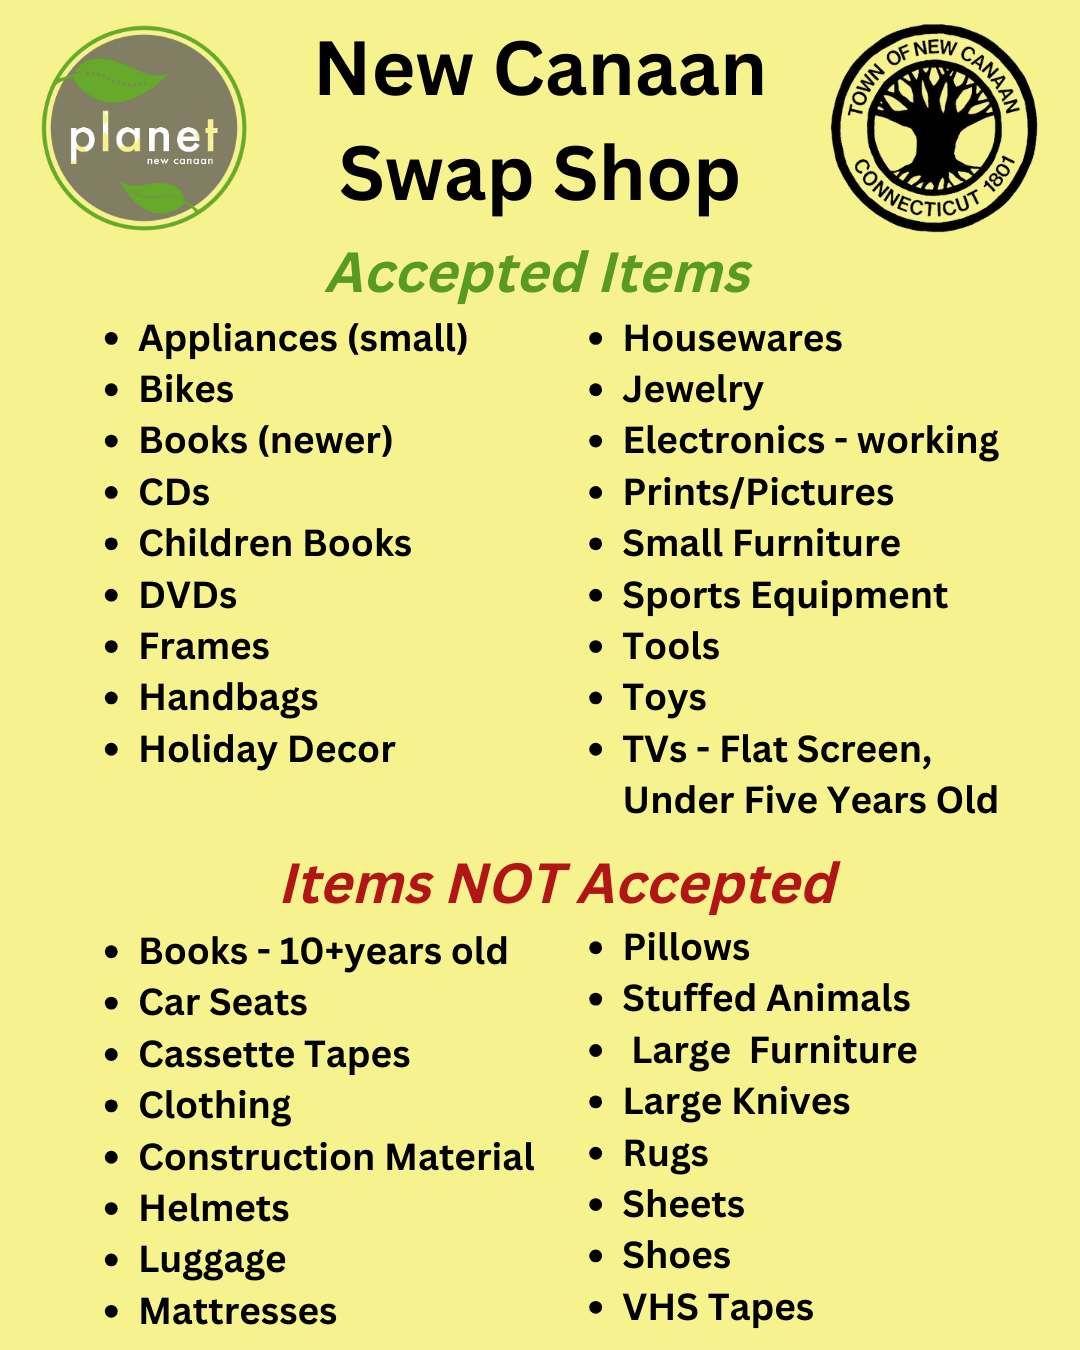 Reduce waste with the Swap Shop